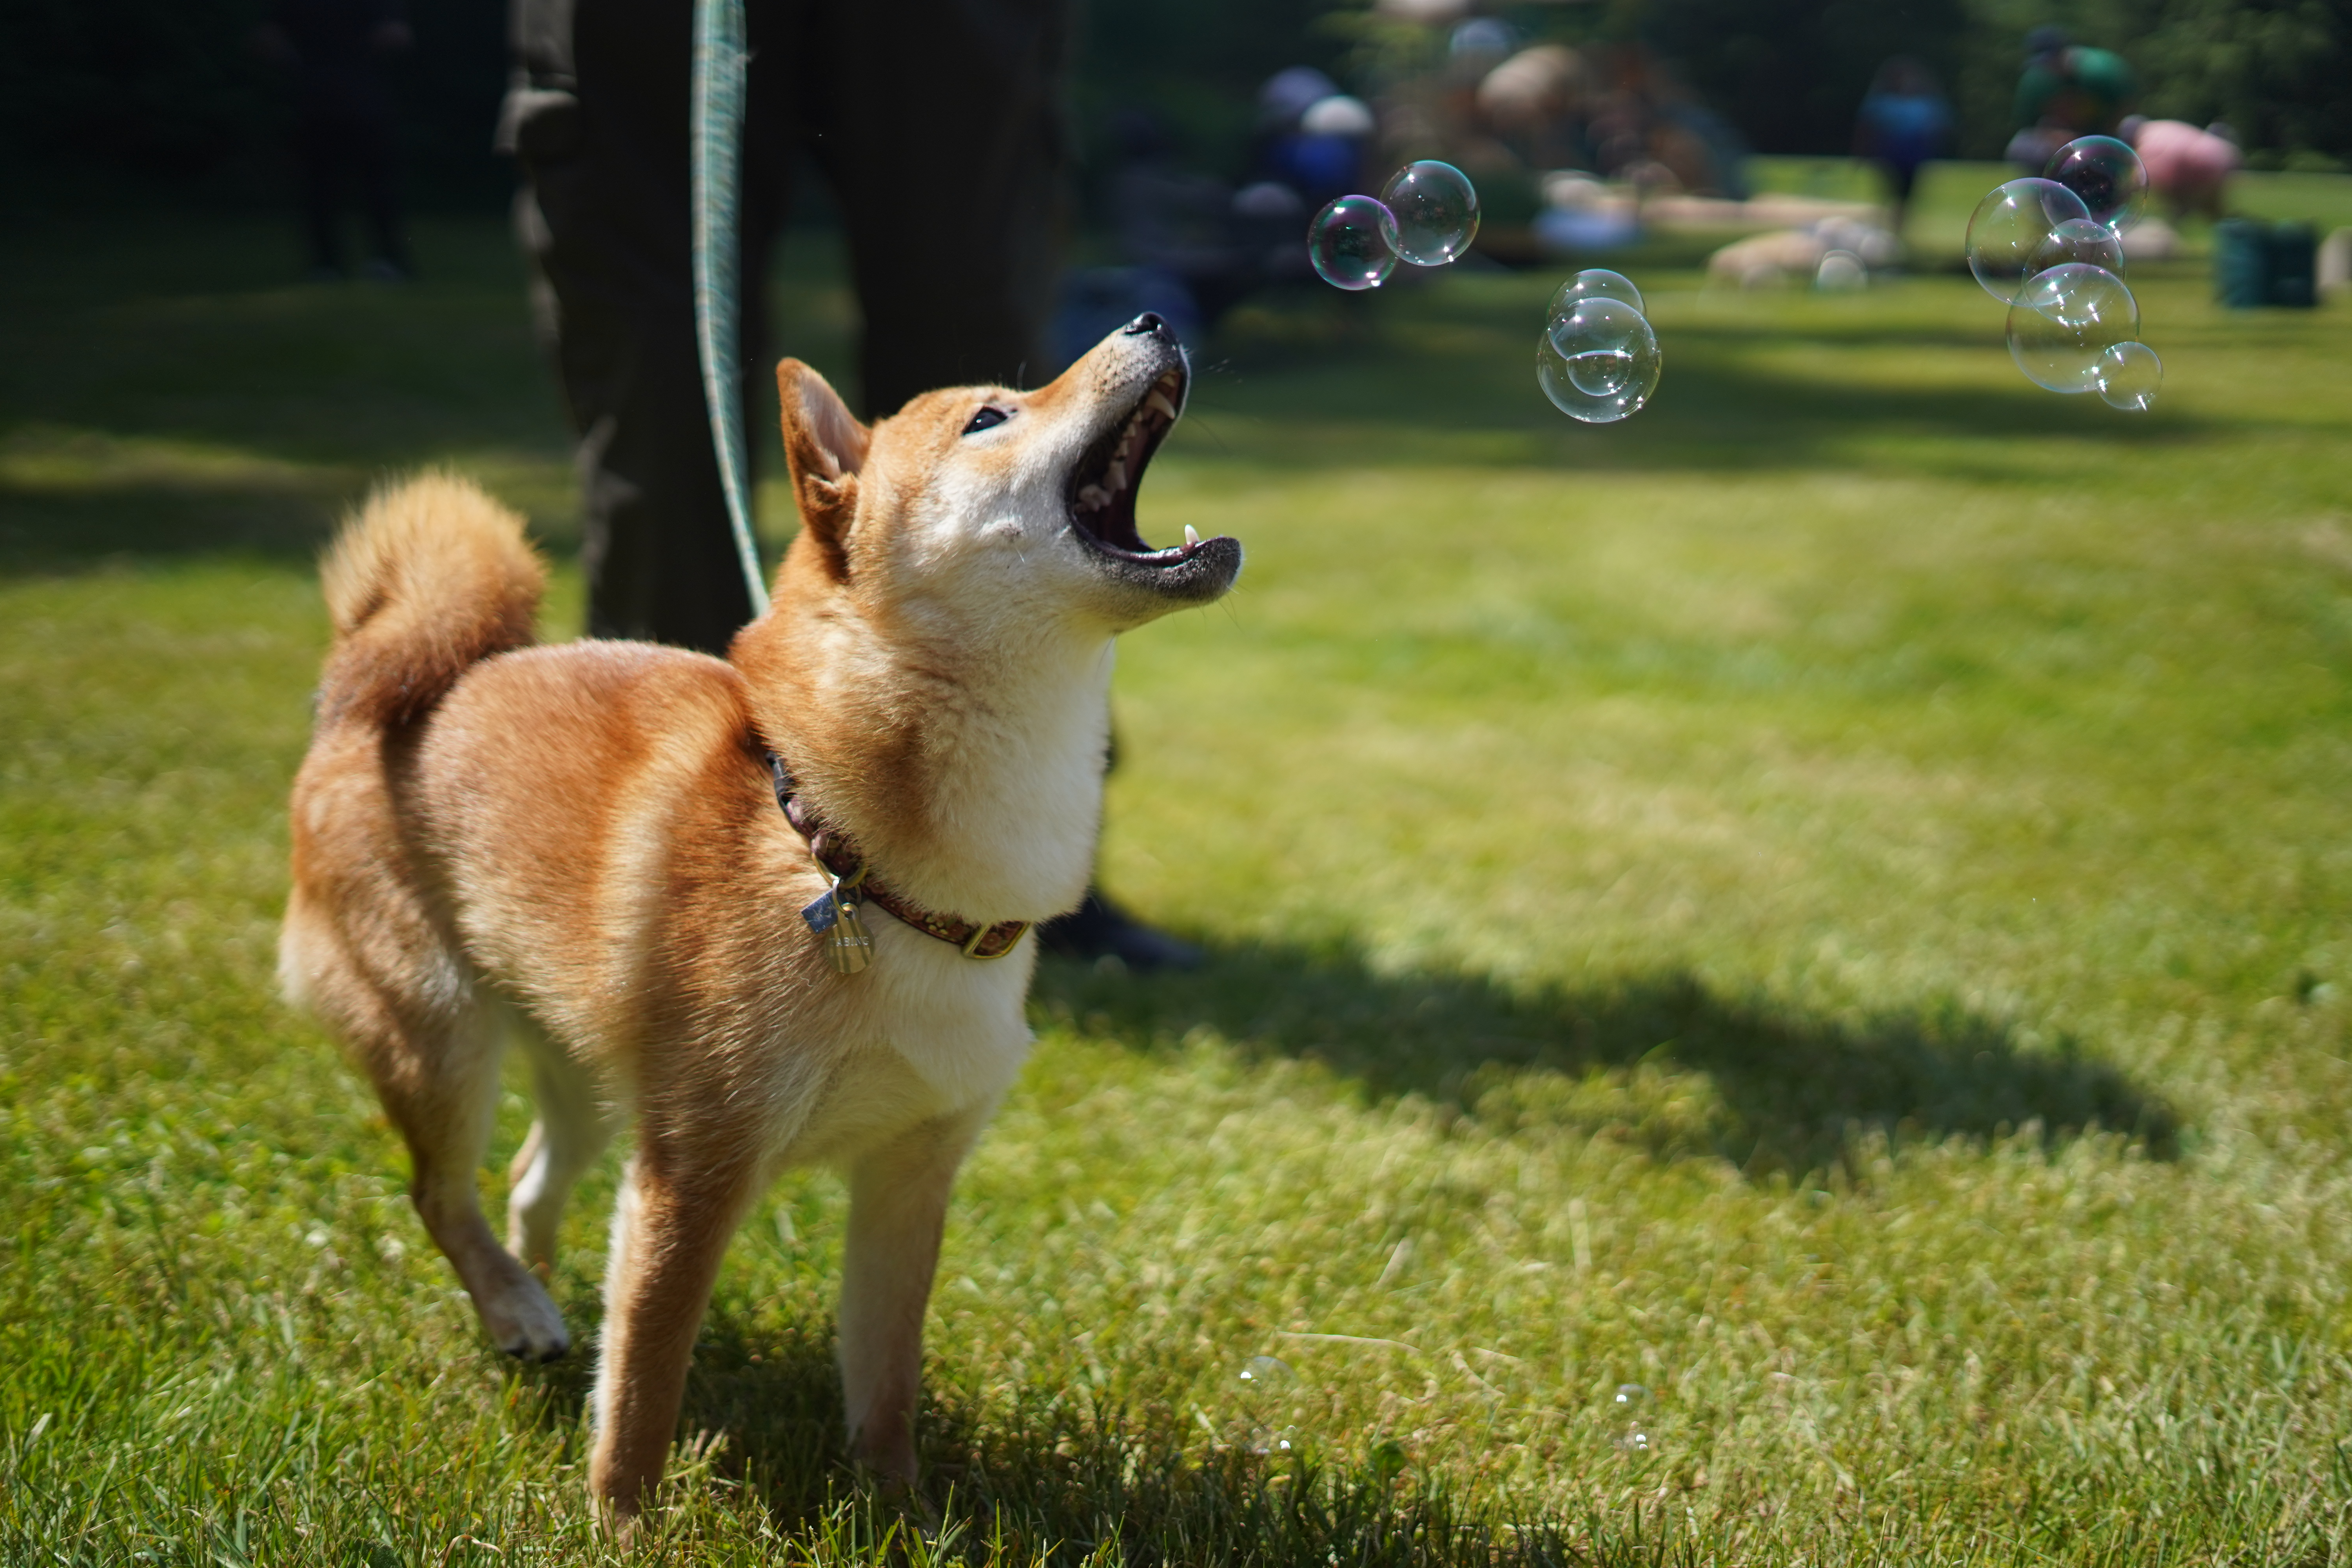 A photo of my dog with bubbles.